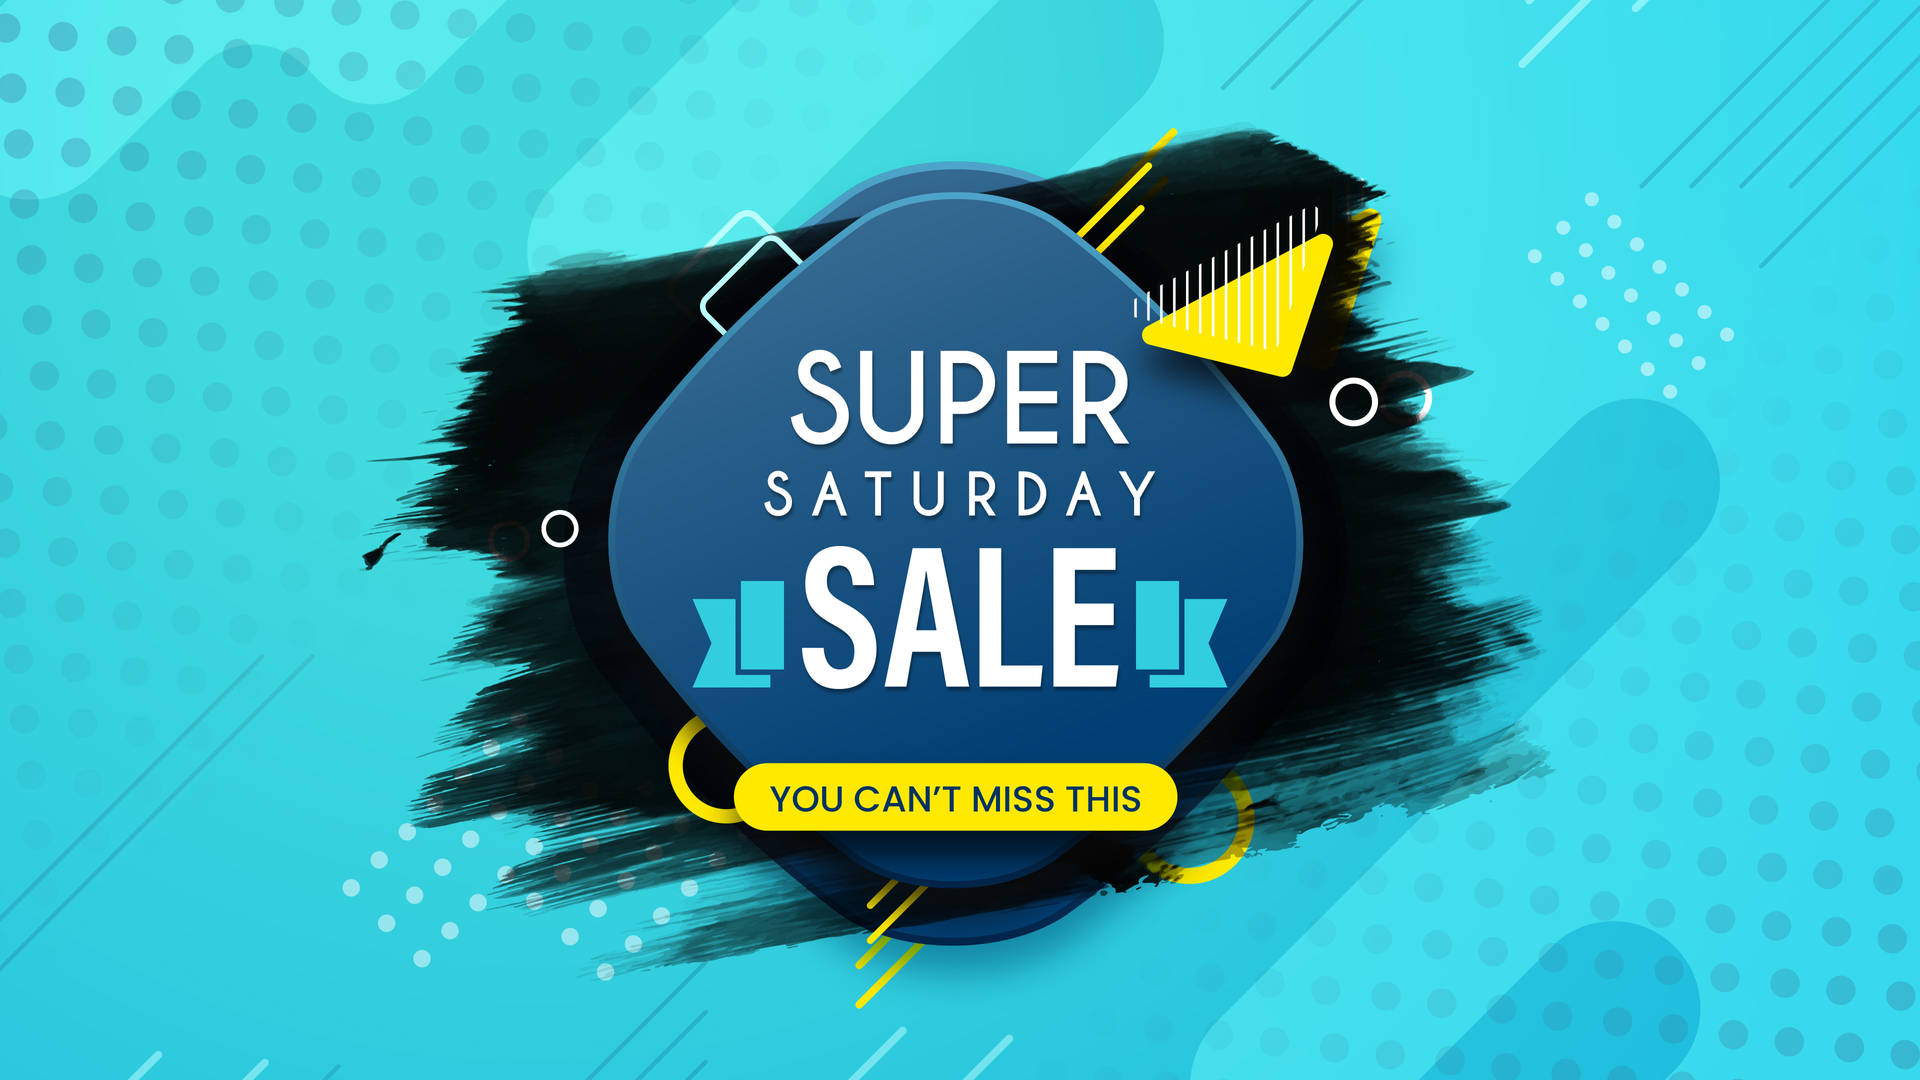 You Can’t Miss This Super Saturday Sale